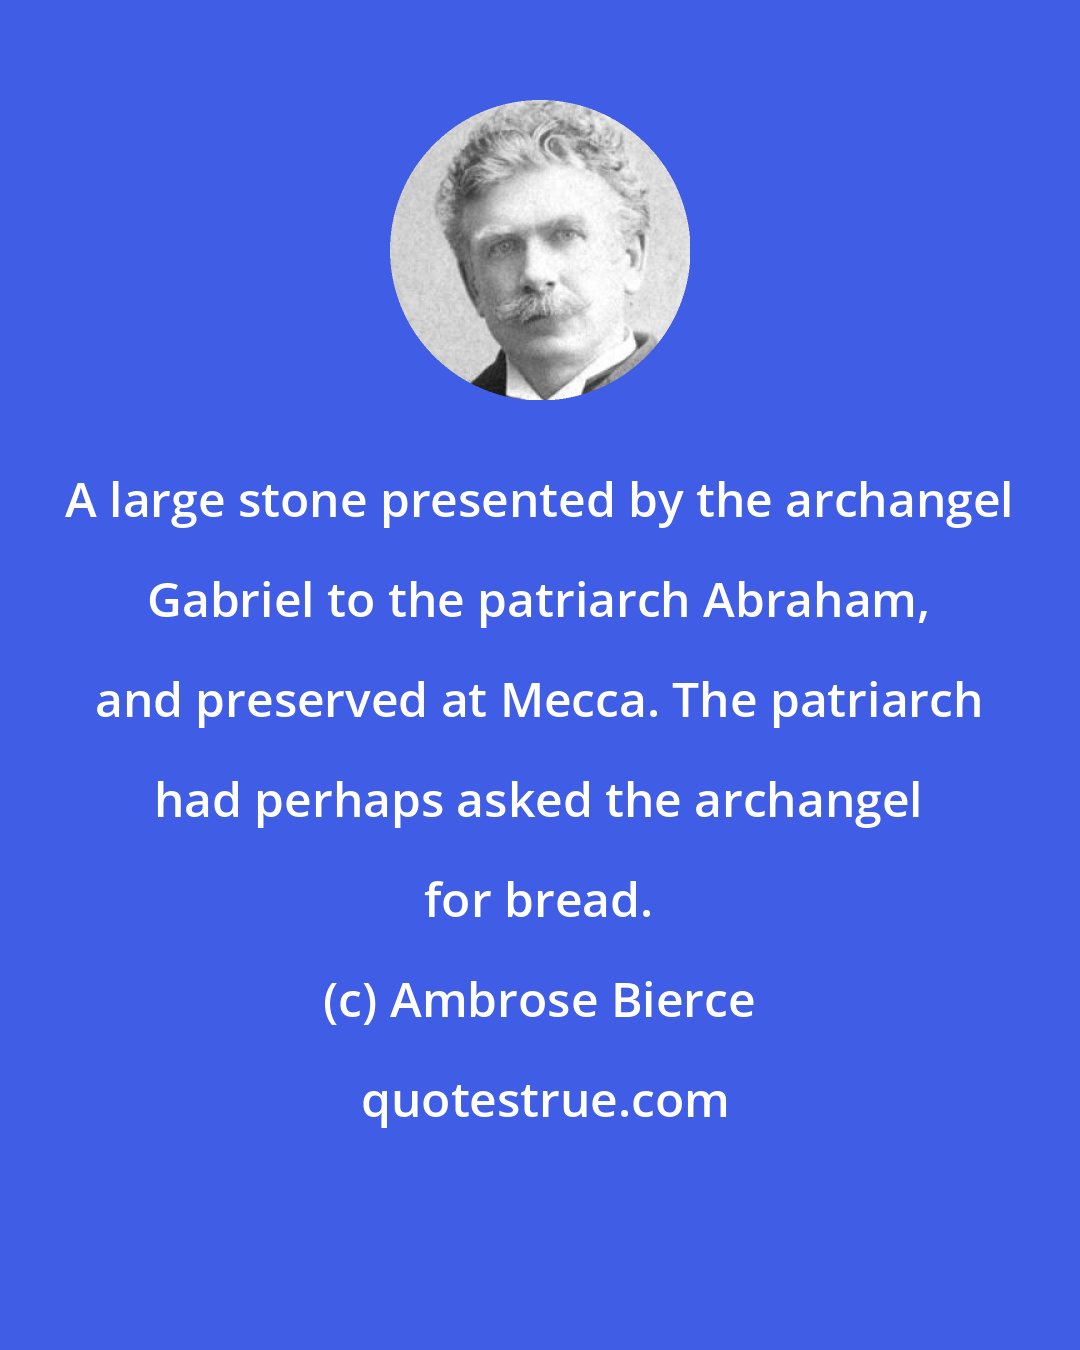 Ambrose Bierce: A large stone presented by the archangel Gabriel to the patriarch Abraham, and preserved at Mecca. The patriarch had perhaps asked the archangel for bread.